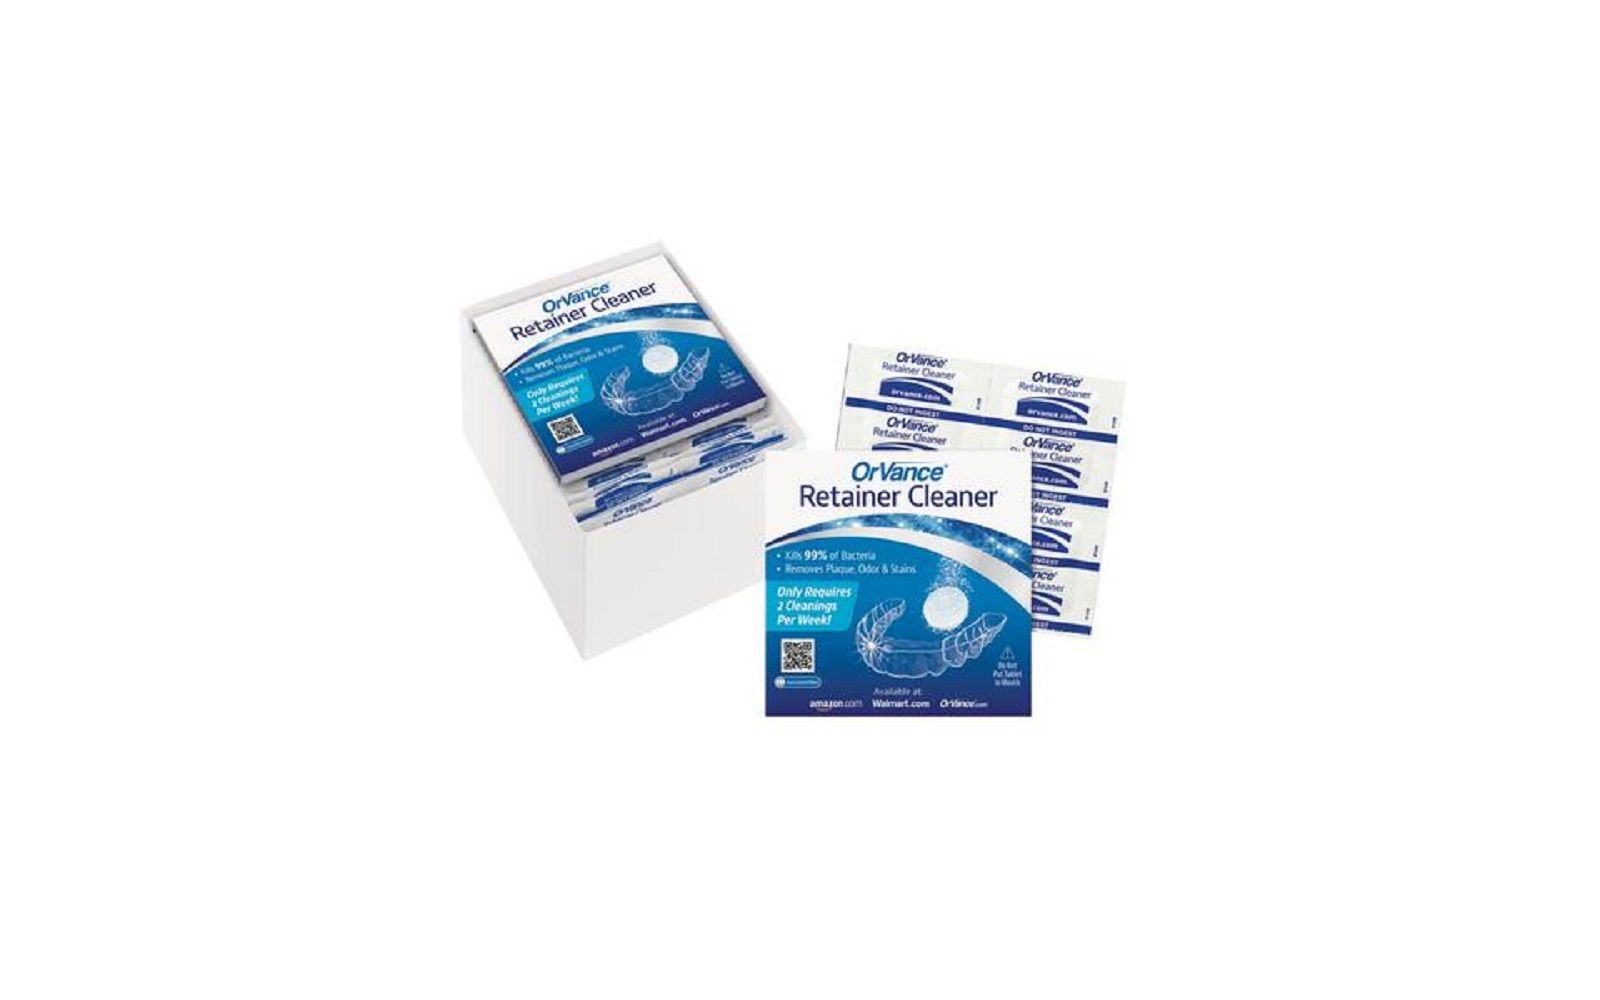 Orvance® retainer cleaner tablets - orvance llc